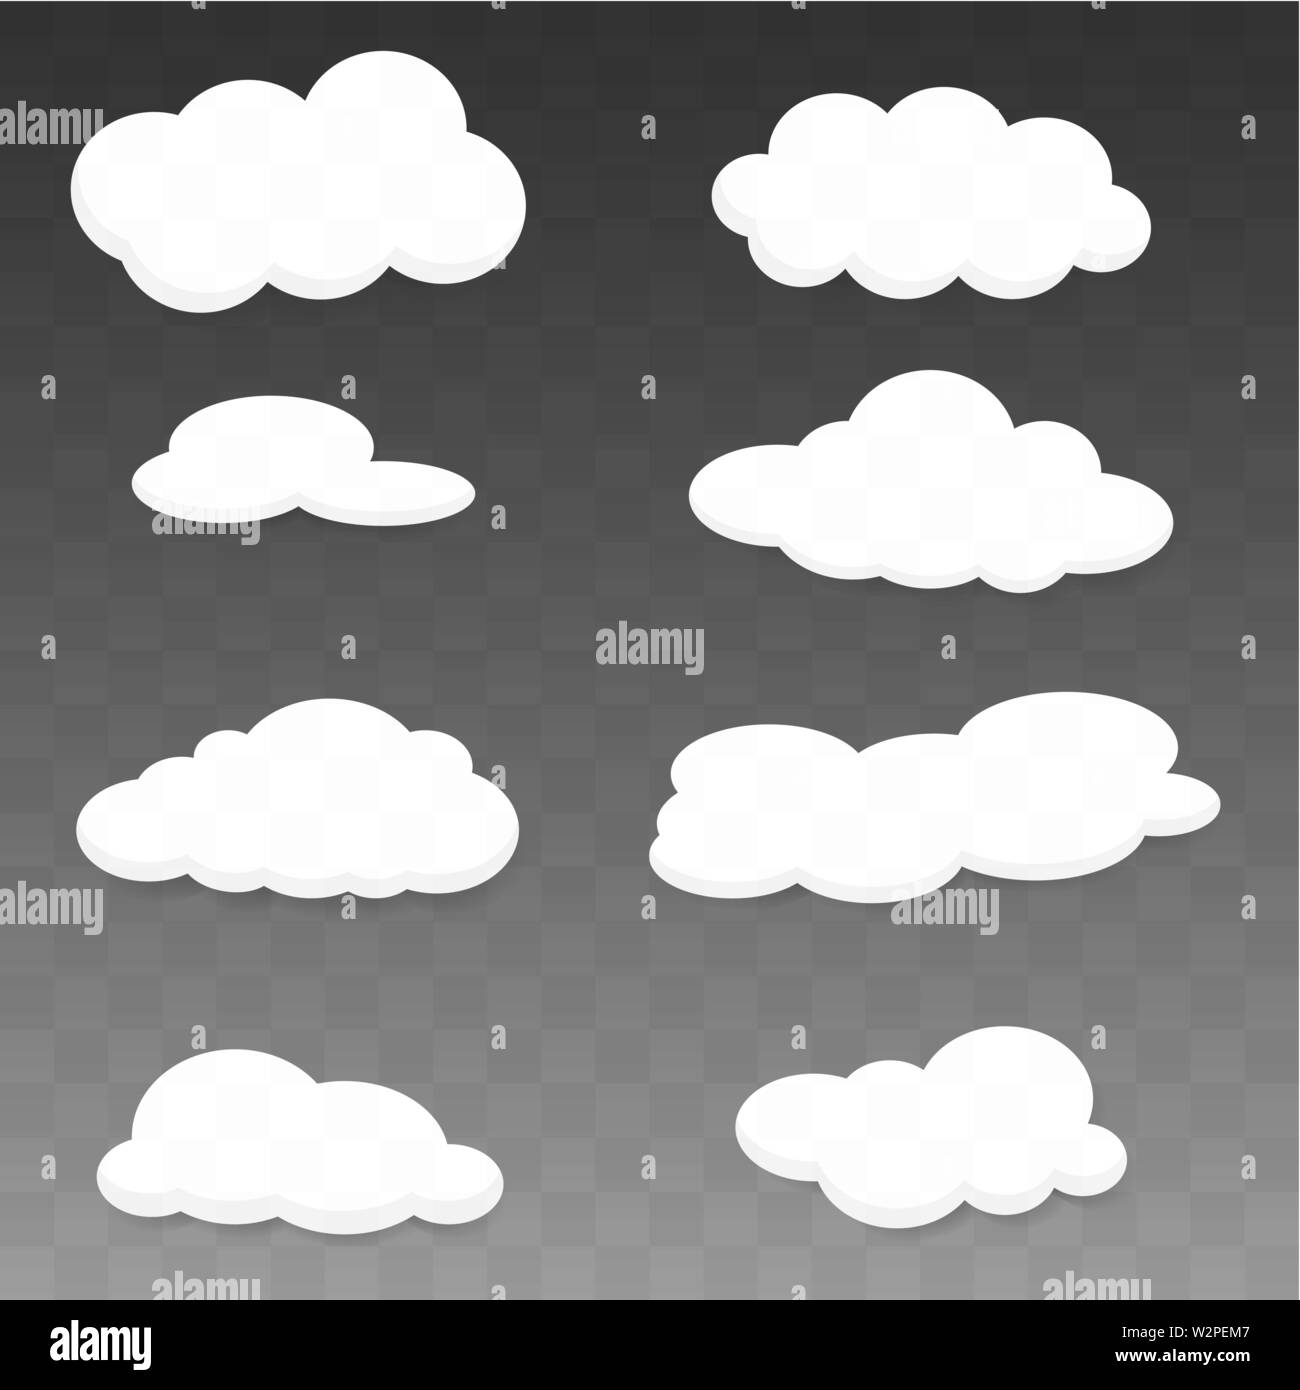 Clouds icons set. Nature illustration. Vector eps10 Stock Vector